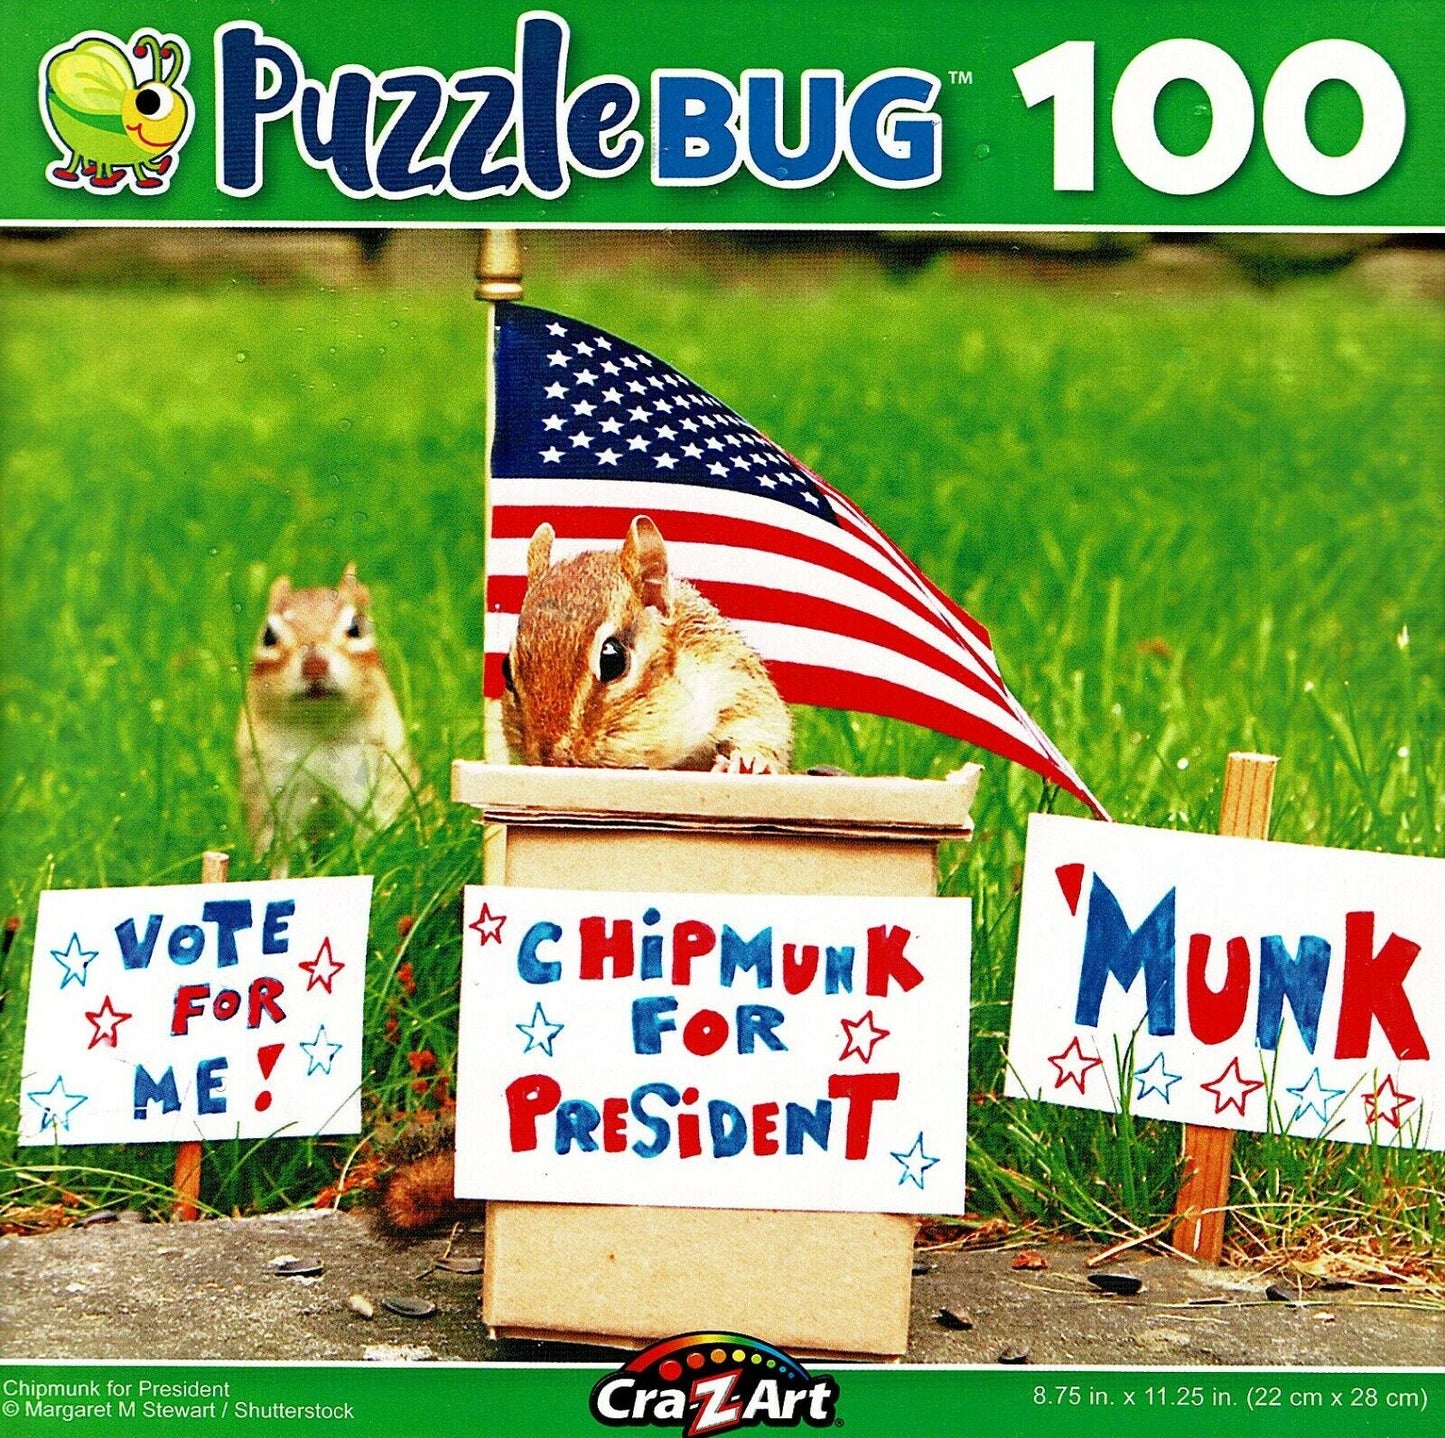 Puzzlebug 100 Pieces Jigsaw Puzzle: Chipmunk for President